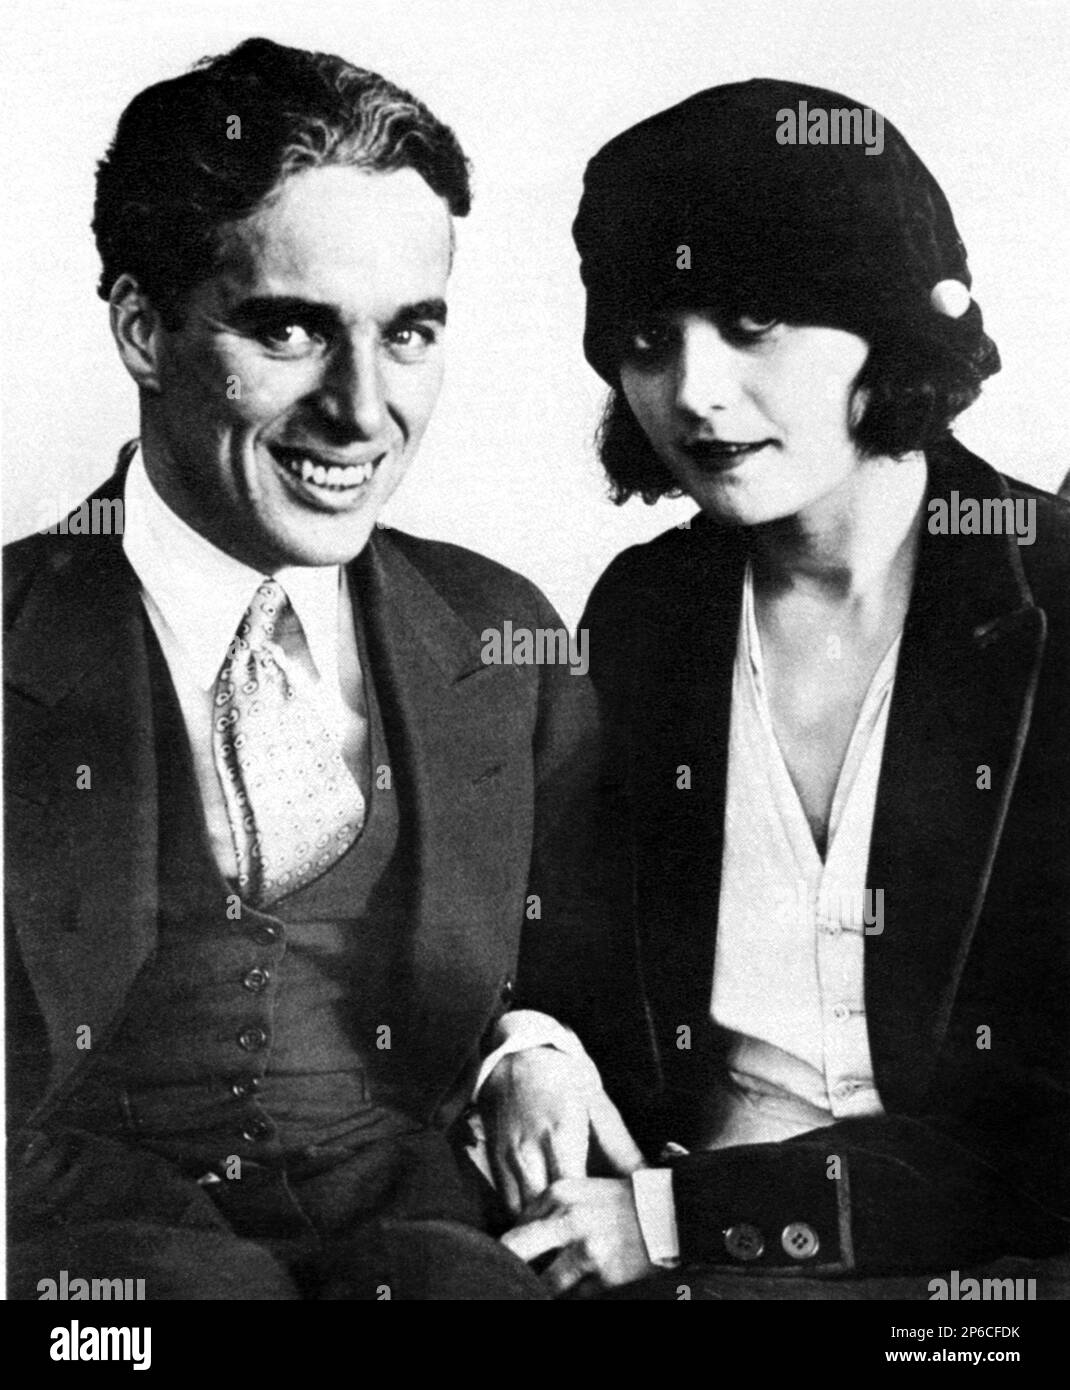 1923 c, USA : The silent movie actress POLA NEGRI was engaged  with  the celebrated english actor and movie director CHARLES CHAPLIN ( 1889 - 1977 ) for pubblicity reasons and opportunity. . This two movie legends never played together in the same movie and the self-tittled love story during from 1923 to 1925 only .  - CINEMA - FILM - candid - portrait - ritratto - hat - cappello - regista cinematografico - attore - attrice - comico - tie - cravatta - collar - colletto - fidanzati - fidanzamento - lovers - innamorati - amanti - smile - sorriso ----  Archivio GBB Stock Photo